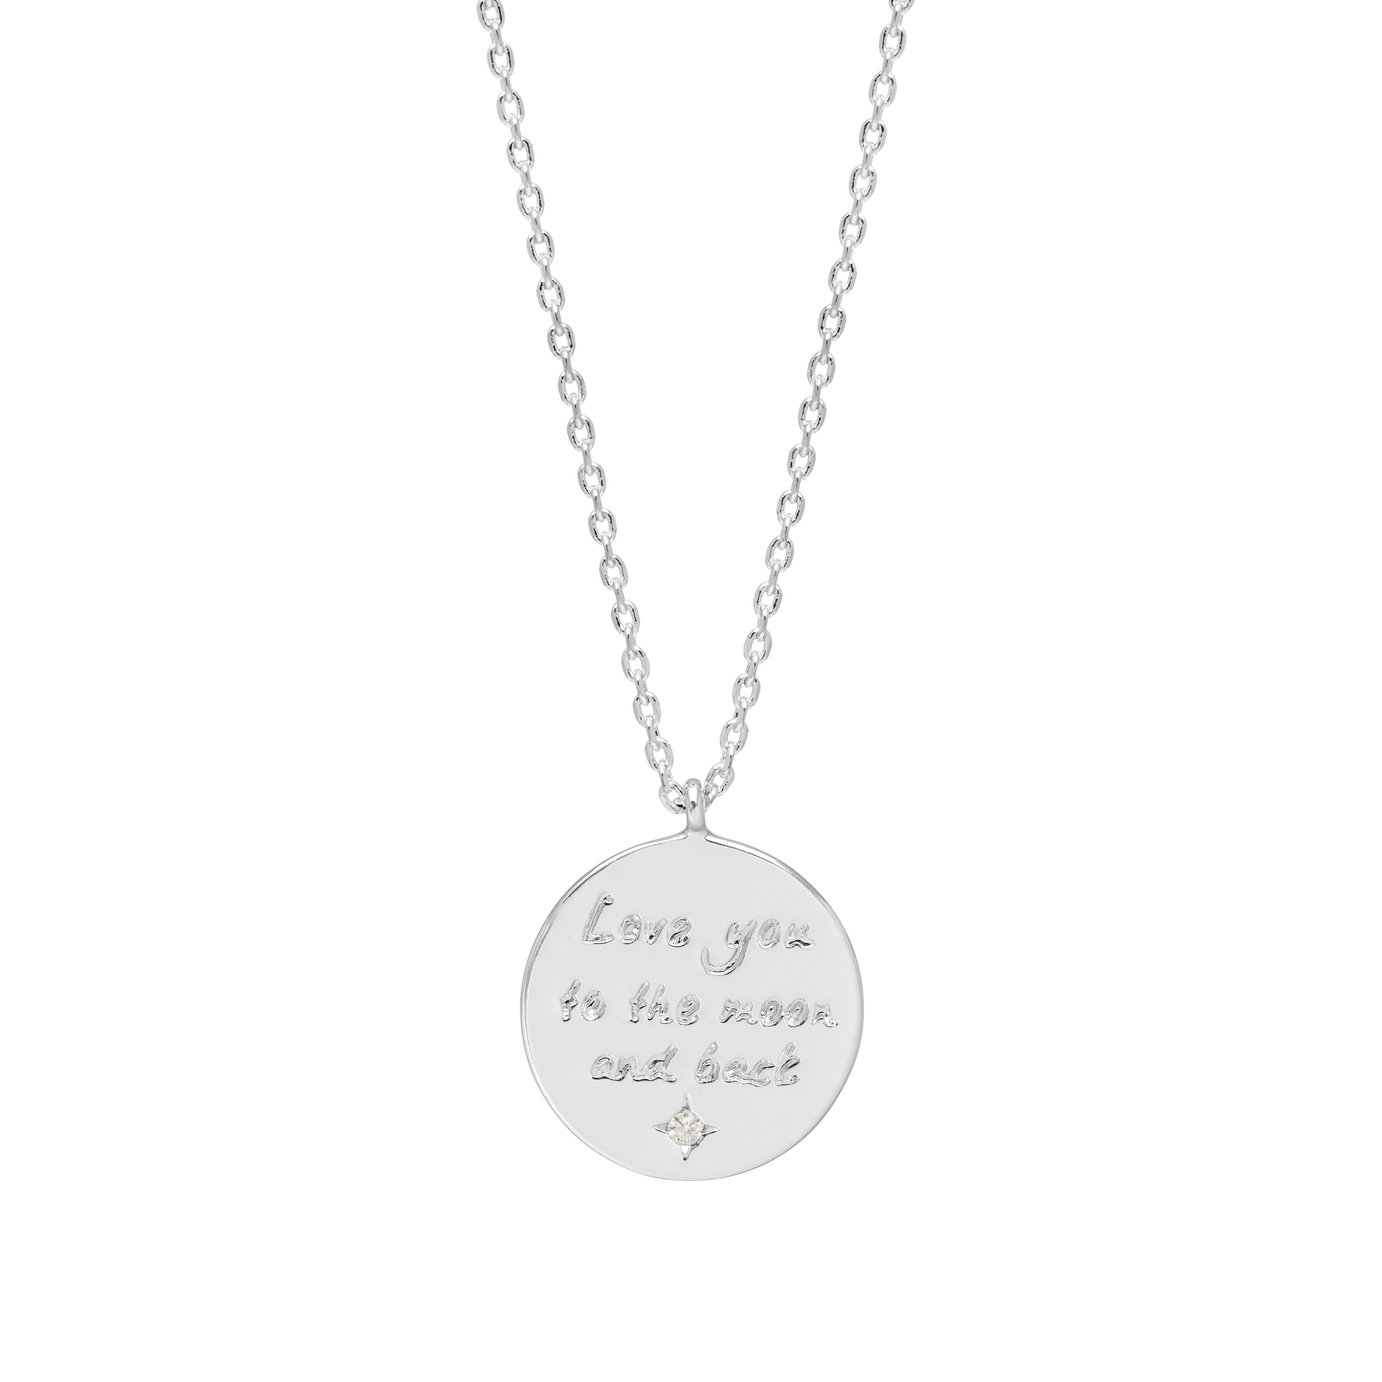 Amelia Grace Love You to the Moon and Back Pendant Necklace